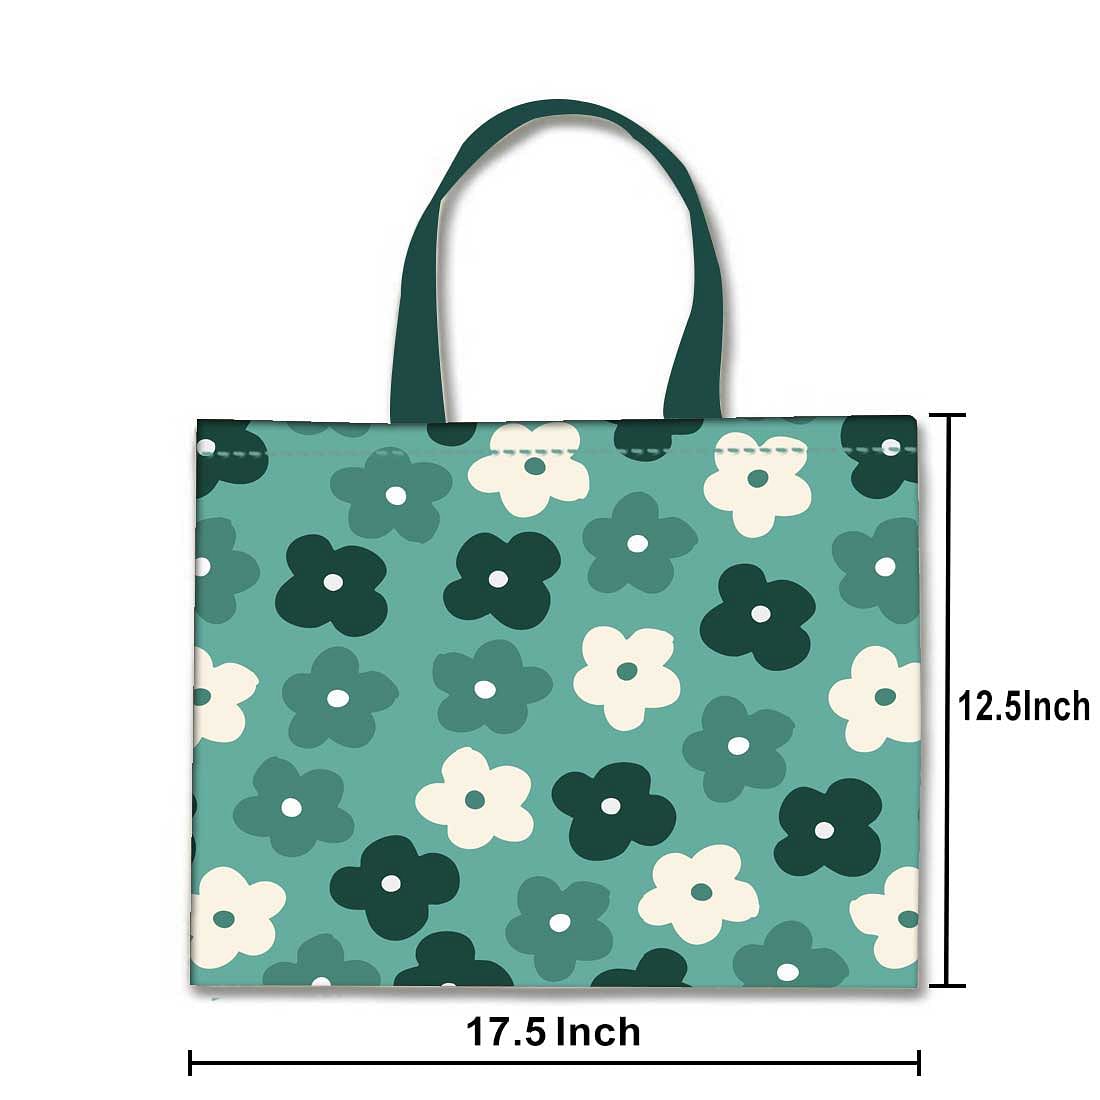 Nutcase Designer Tote Bag for Women Gym Beach Travel Shopping Fashion Bags  with Zip Closure and Internal Pocket to keep cash/valuables - Green Flowers